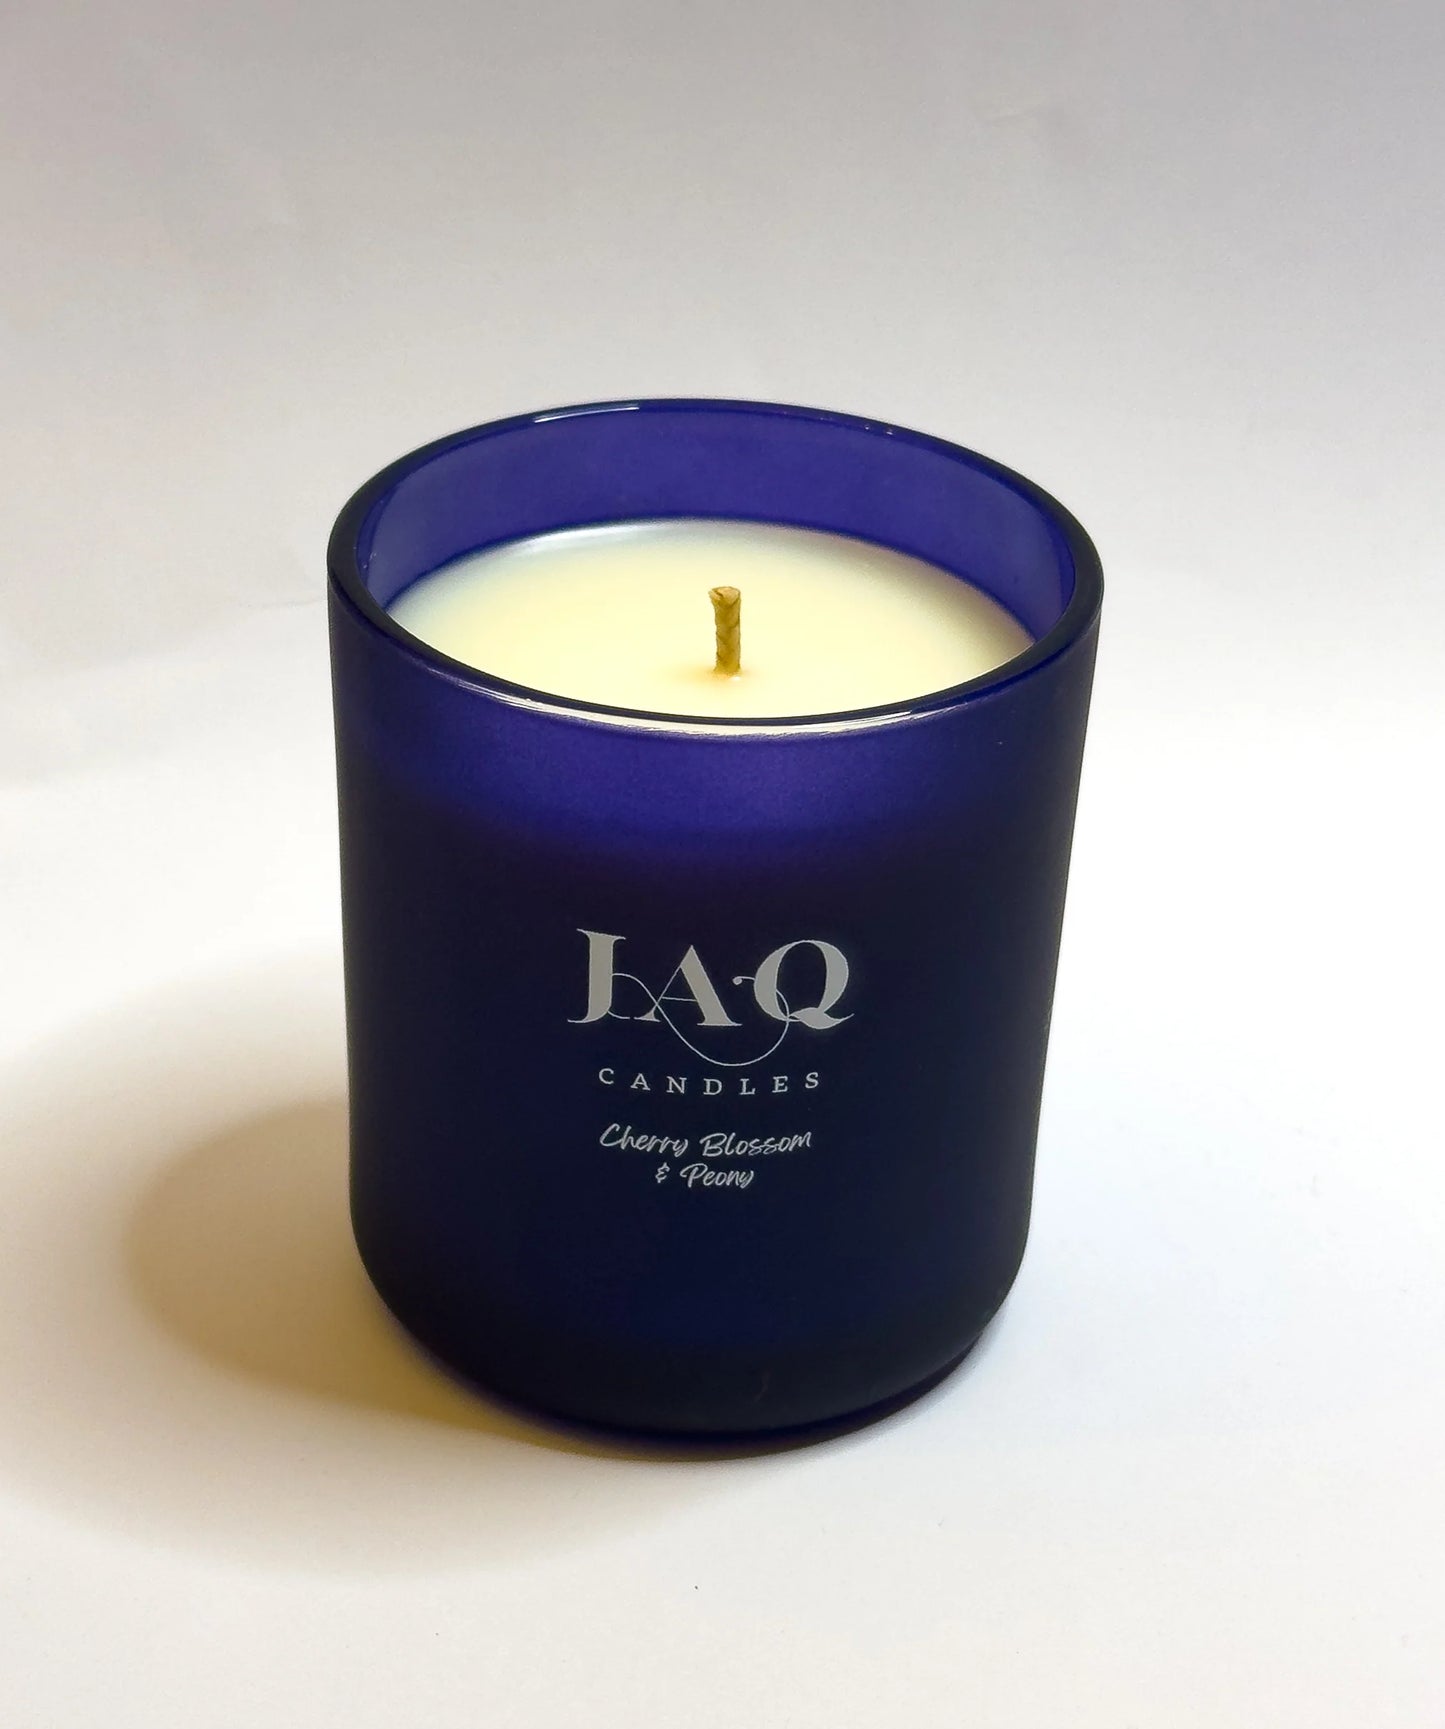 Cherry Blossom & Peony (Limited Edition) Candle by JAQ Candles